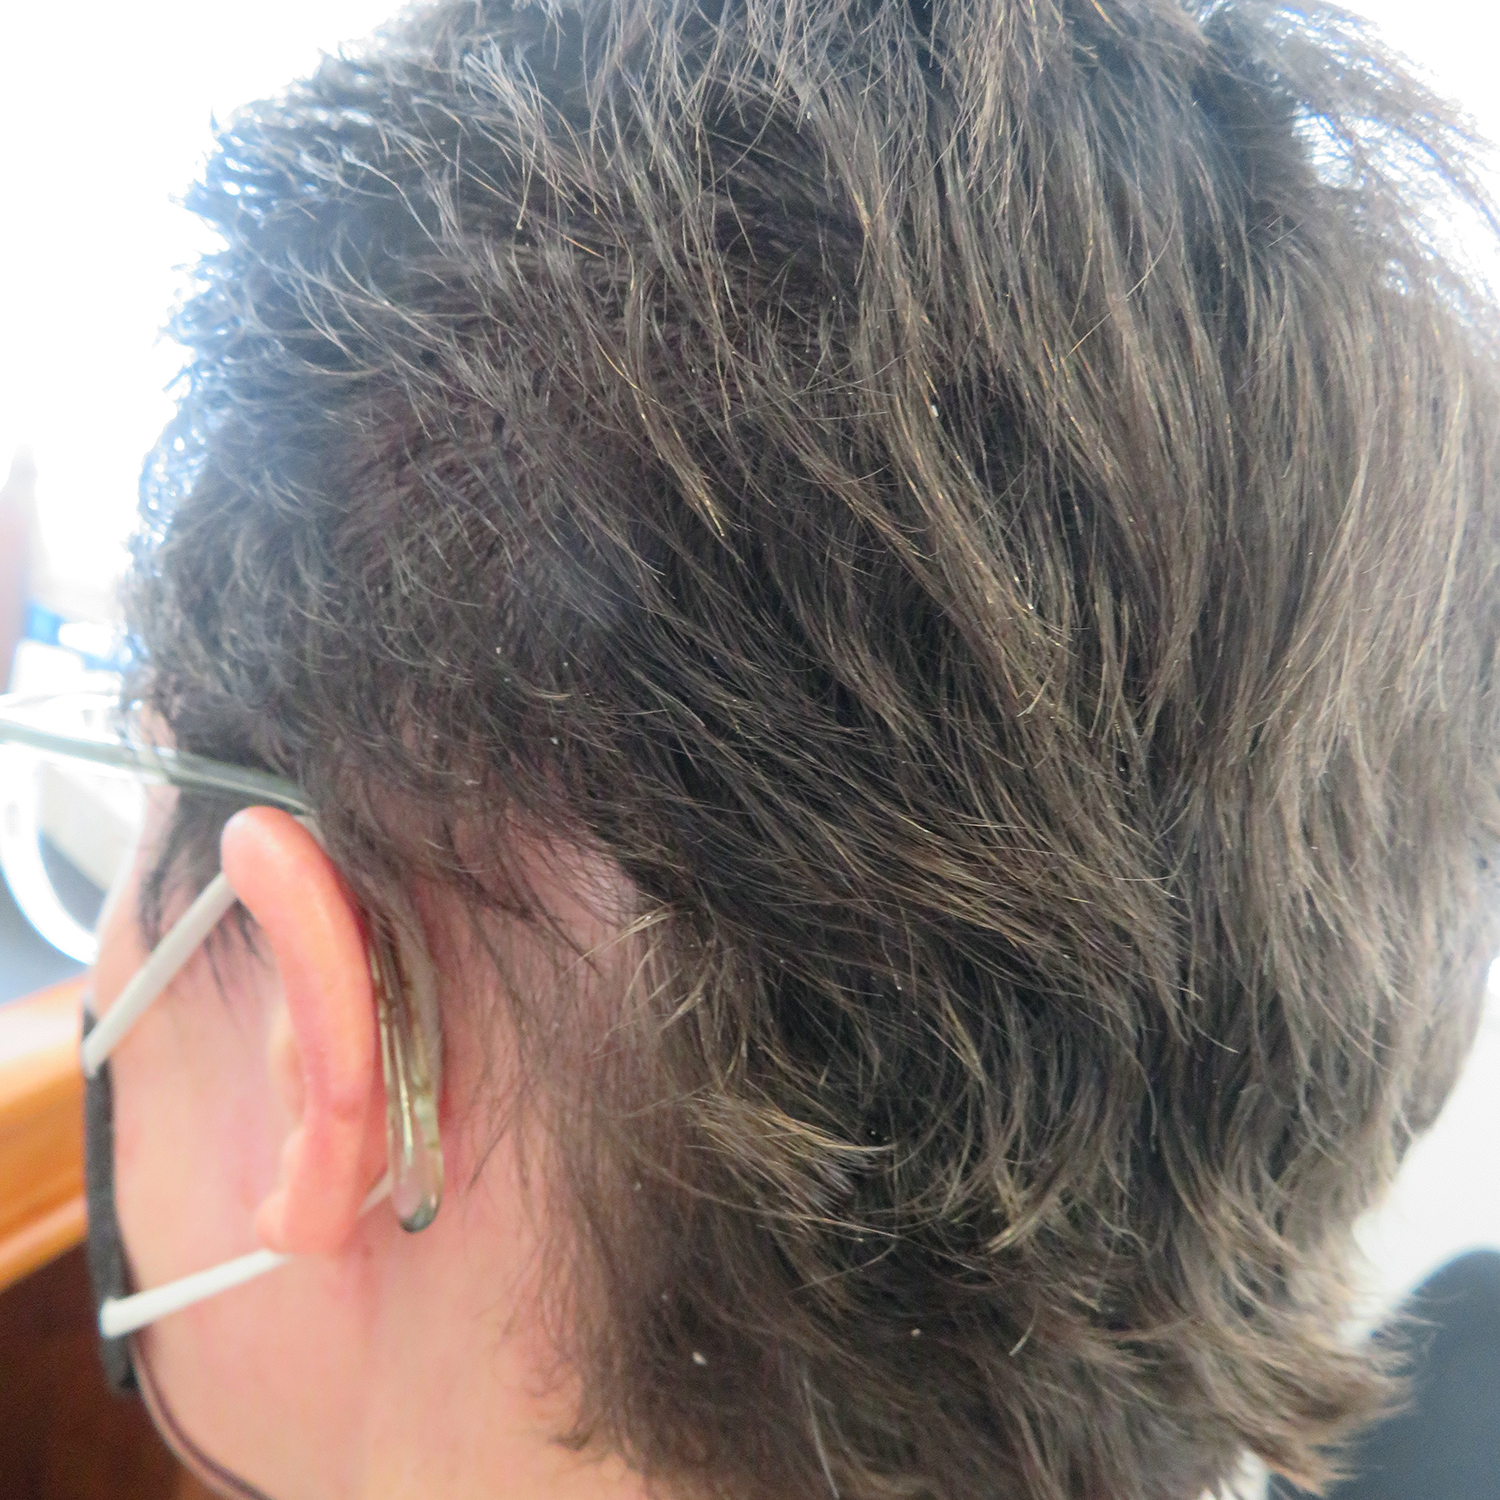 hair regrowth after skin treatment